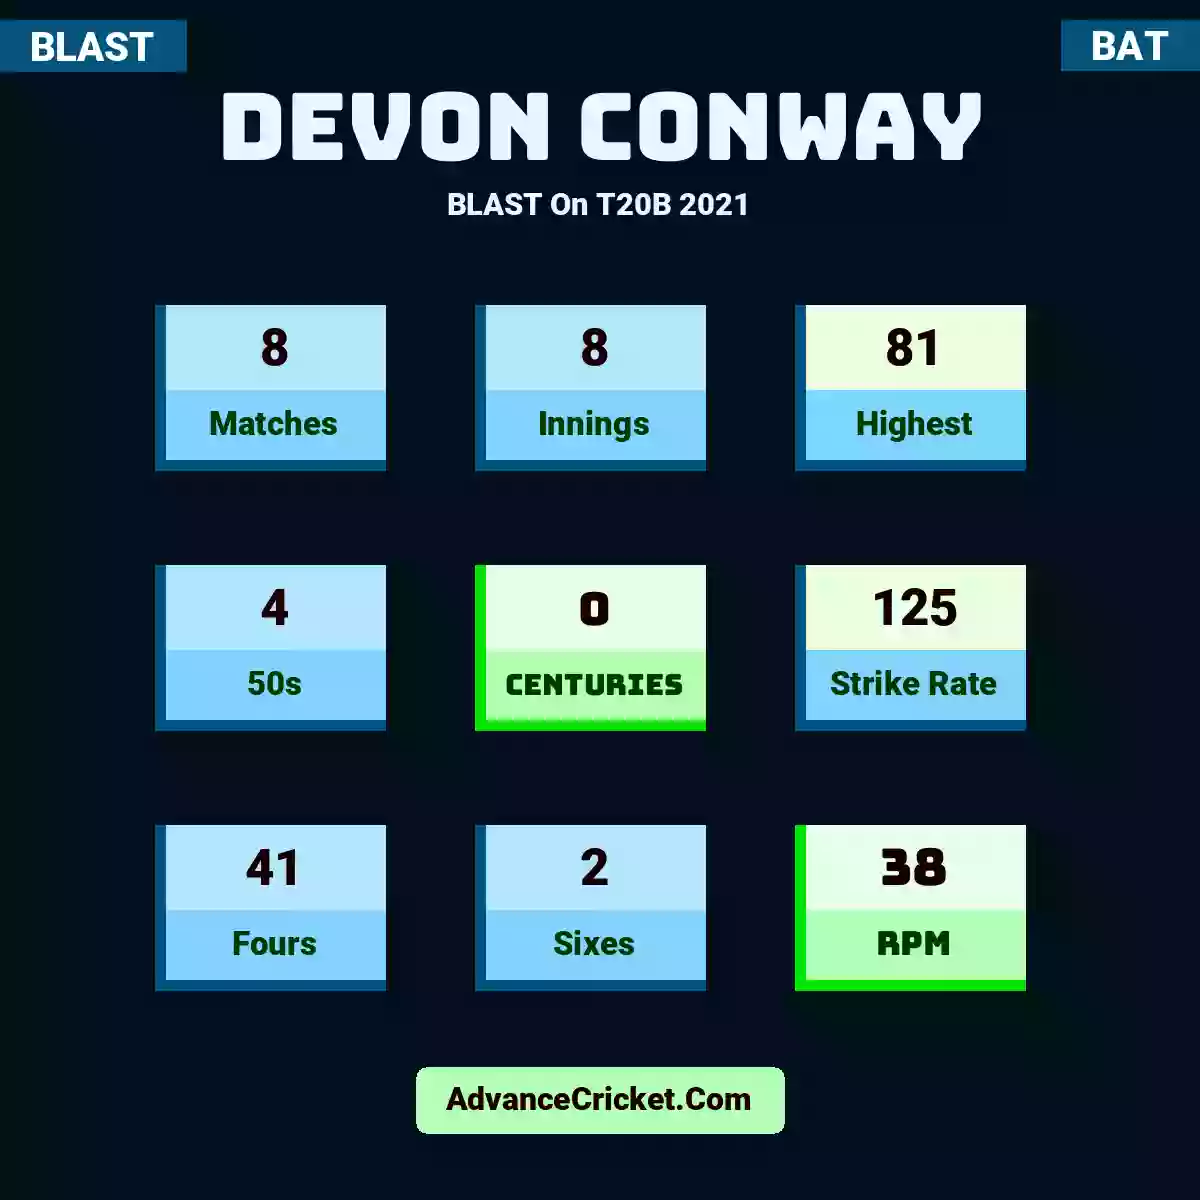 Devon Conway BLAST  On T20B 2021, Devon Conway played 8 matches, scored 81 runs as highest, 4 half-centuries, and 0 centuries, with a strike rate of 125. D.Conway hit 41 fours and 2 sixes, with an RPM of 38.